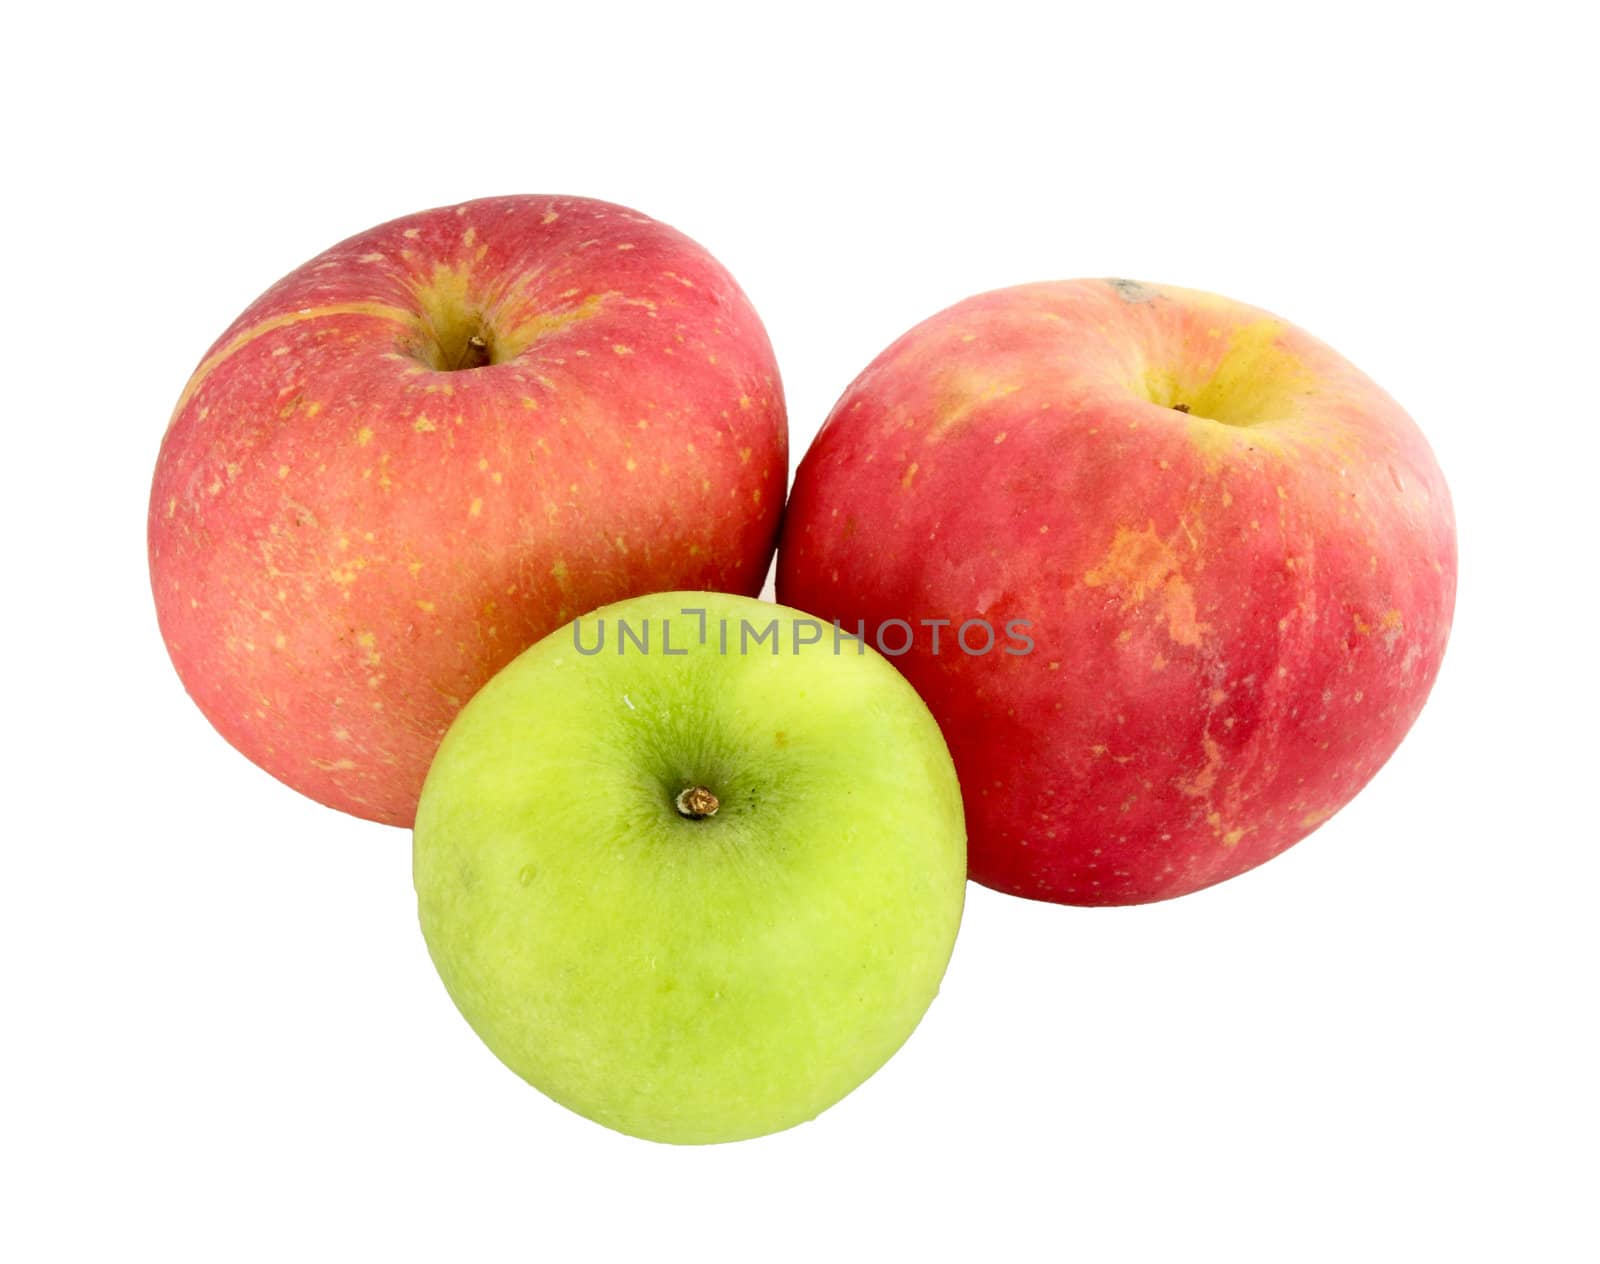 green and red apples on white background